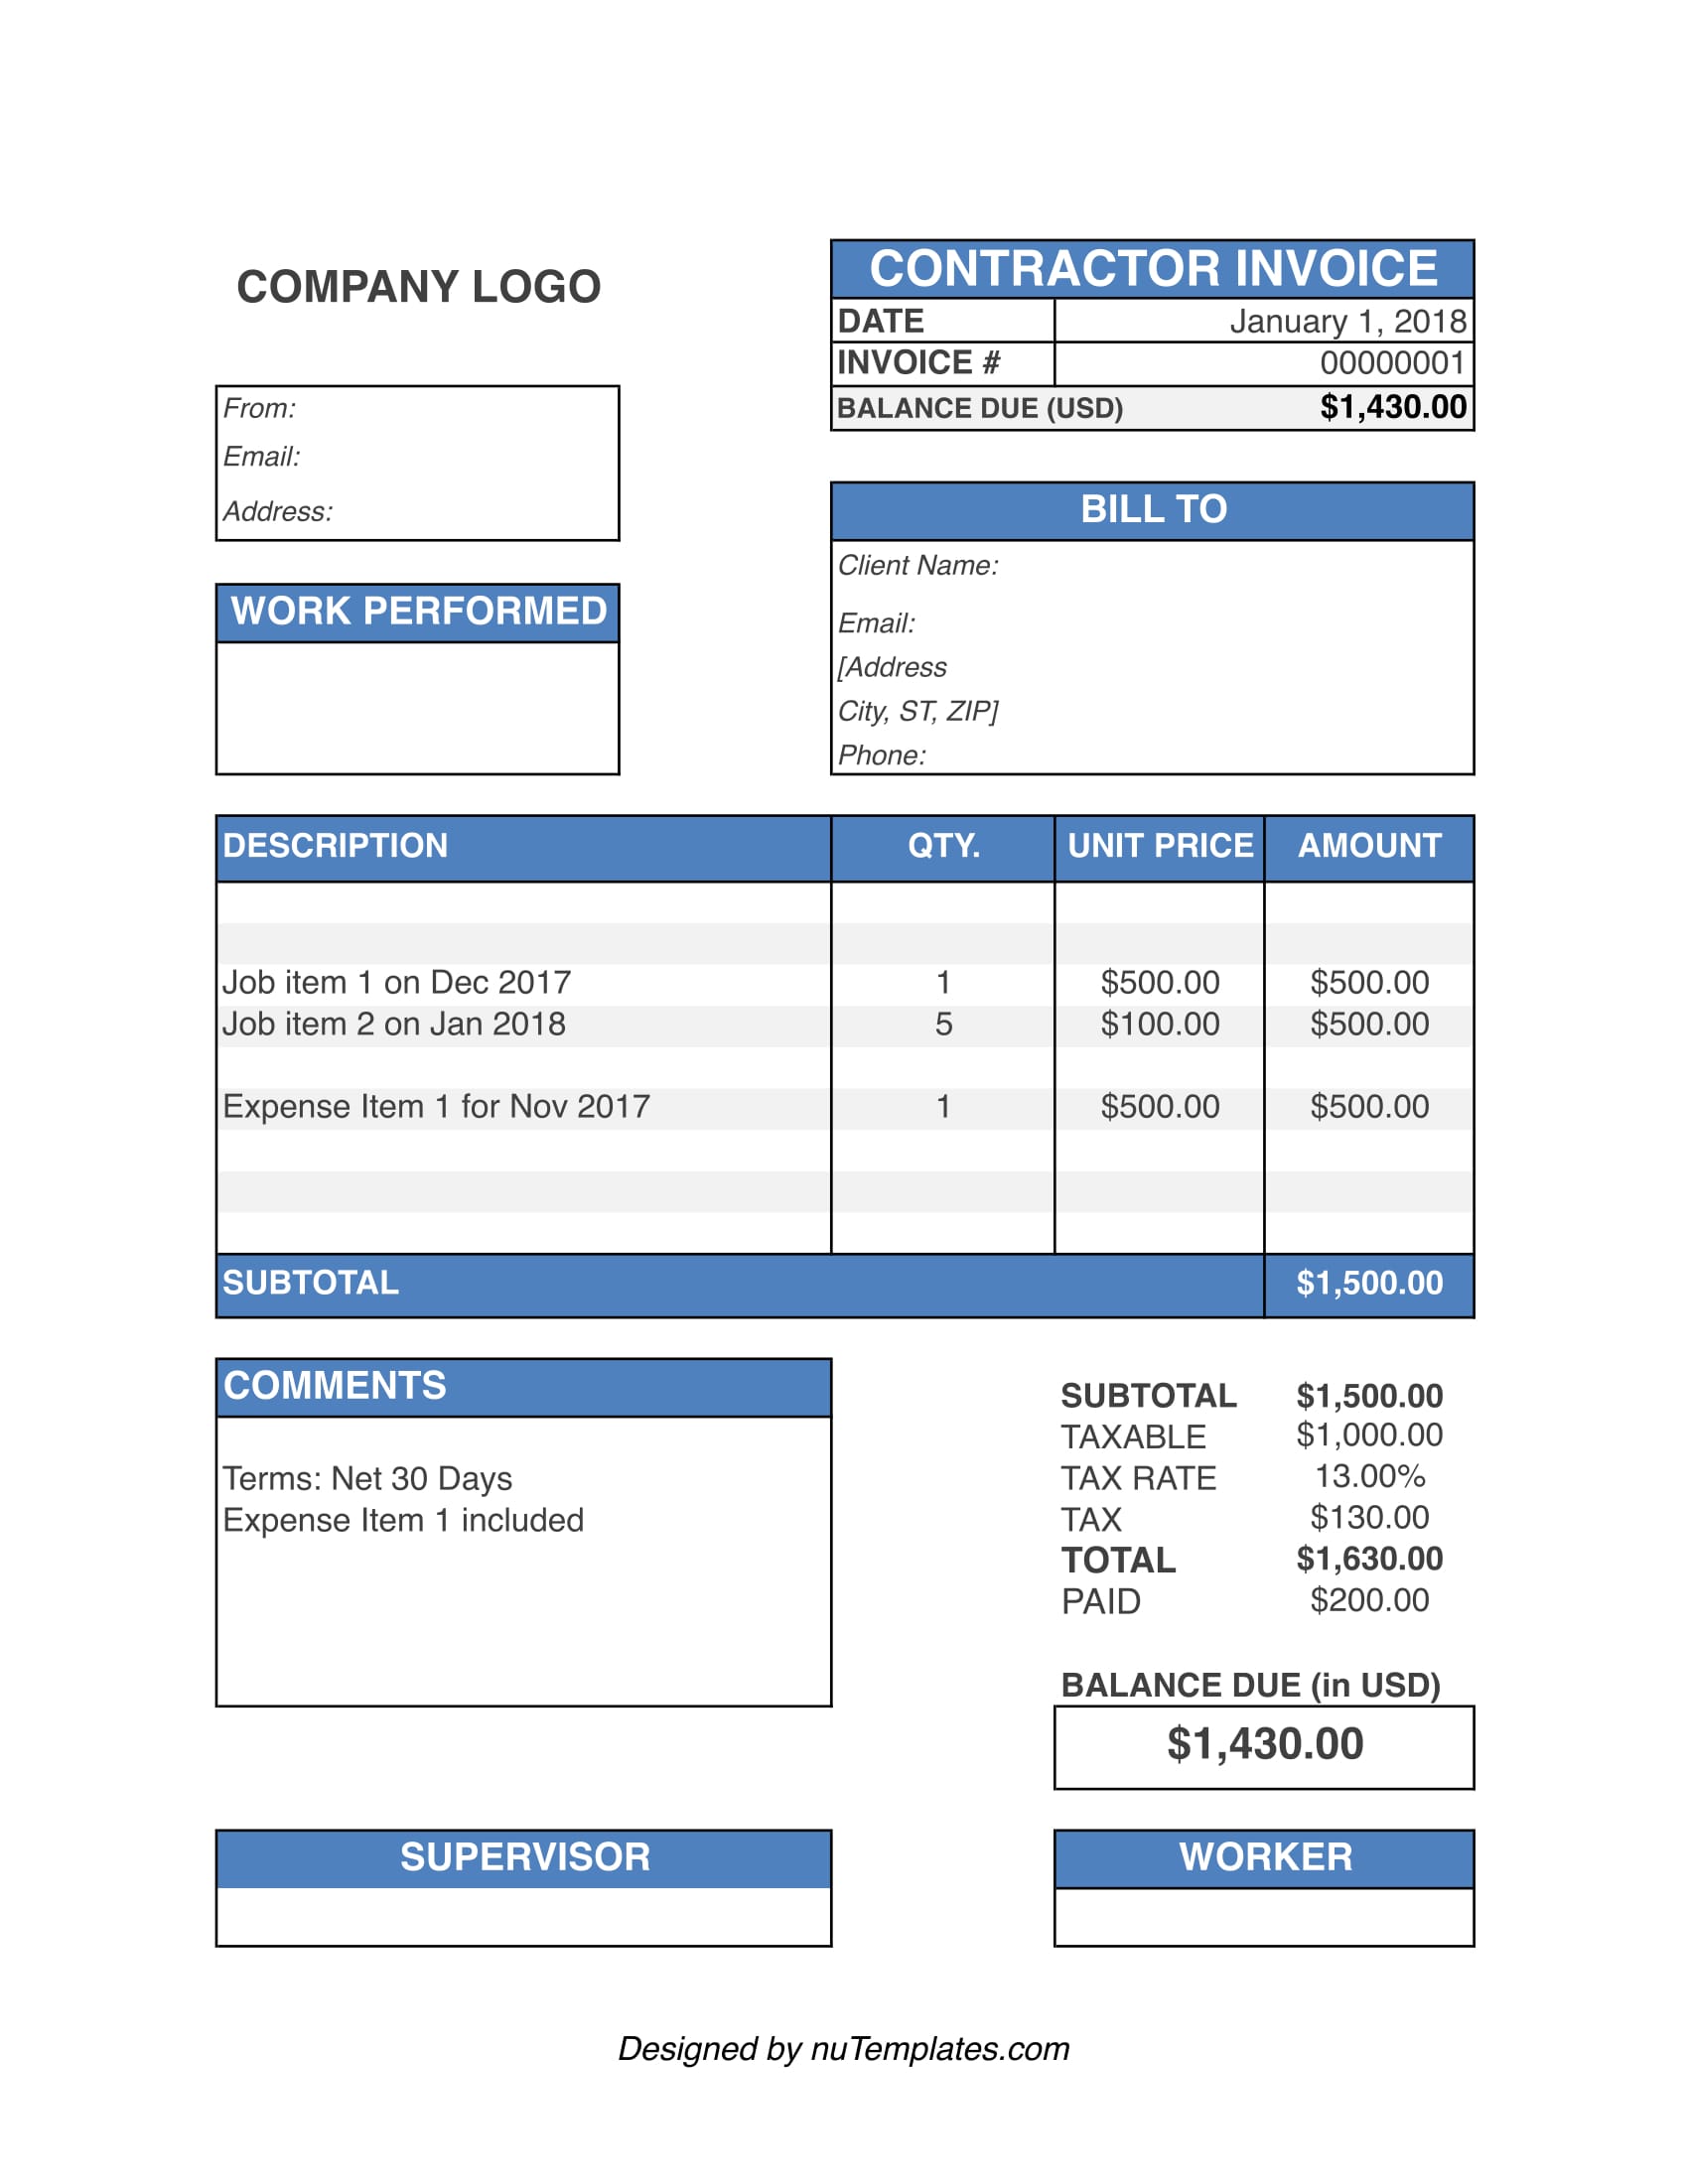 Contractor Invoice Template Contractor Invoices nuTemplates